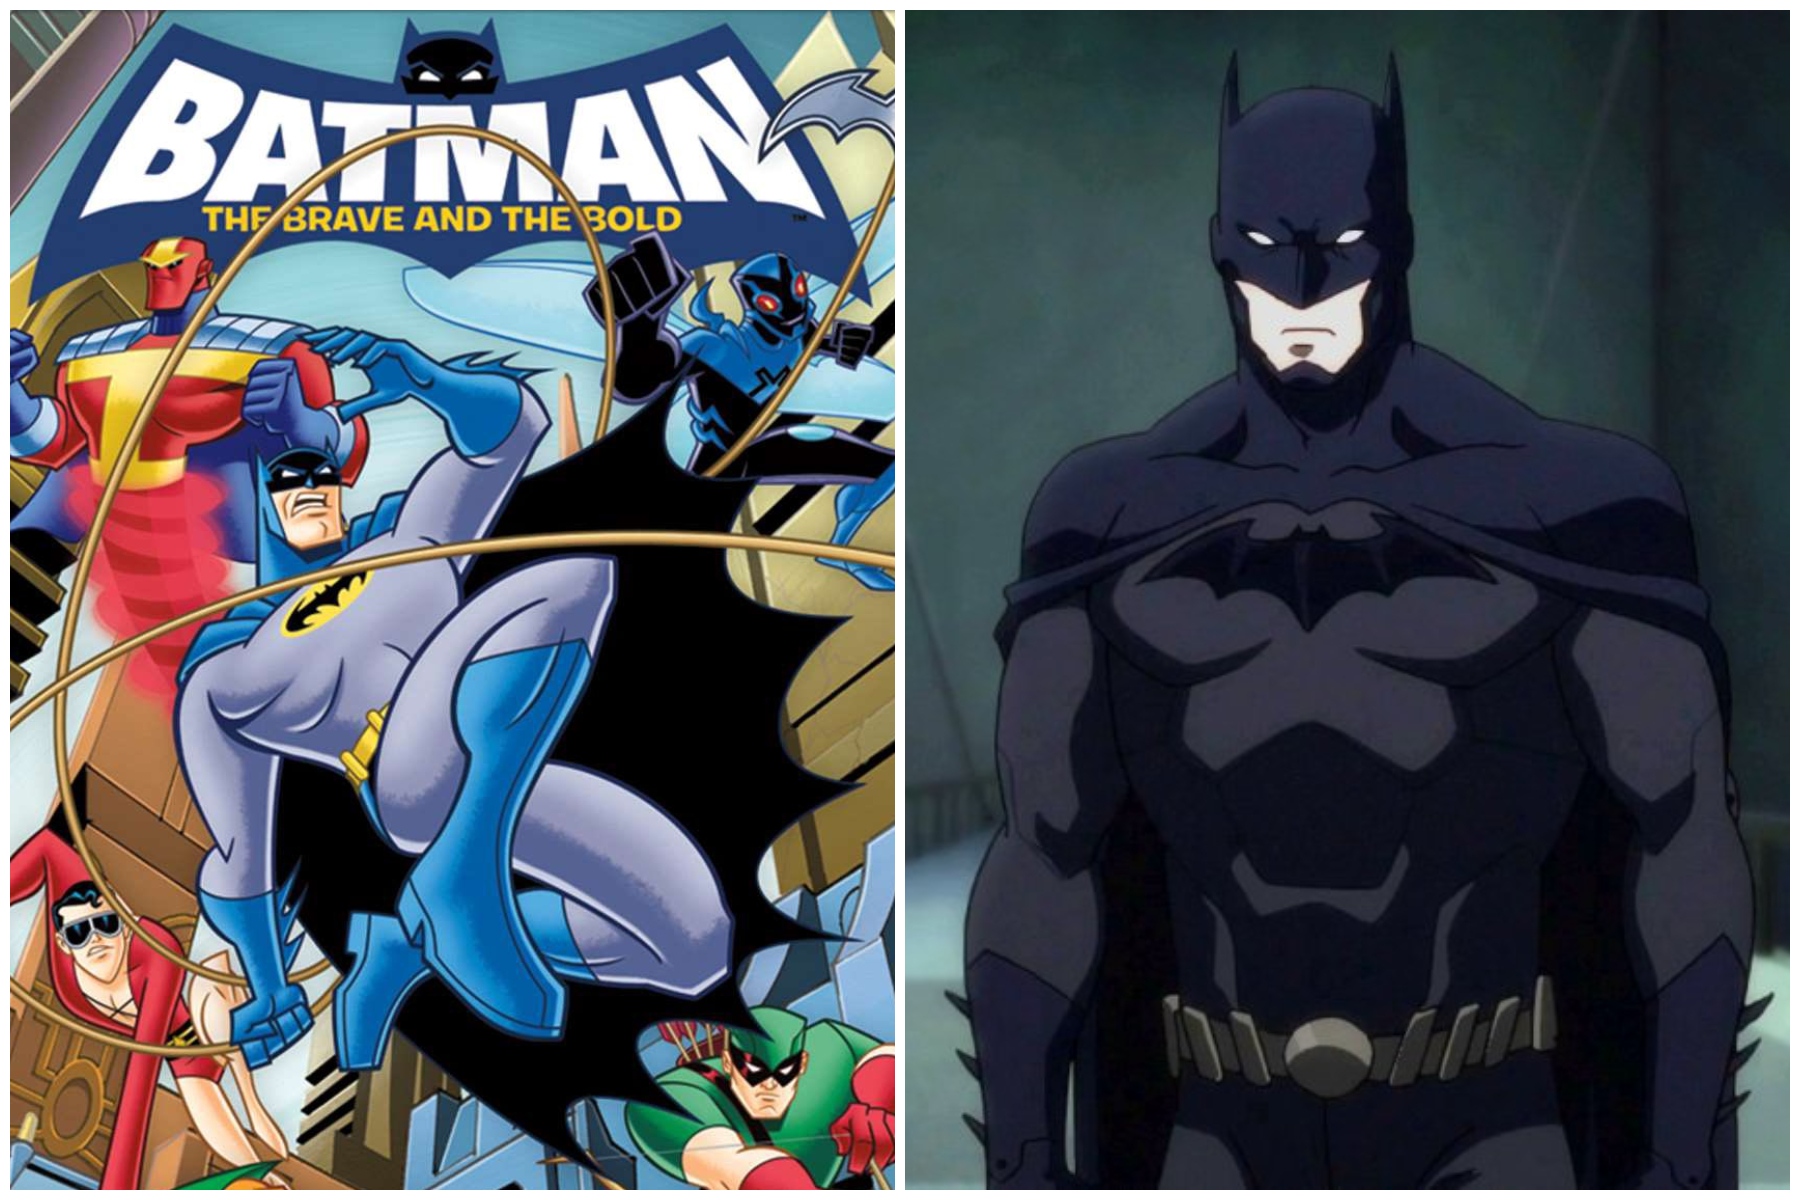 The original inspiration for batman’s cape came from a sketch by whom